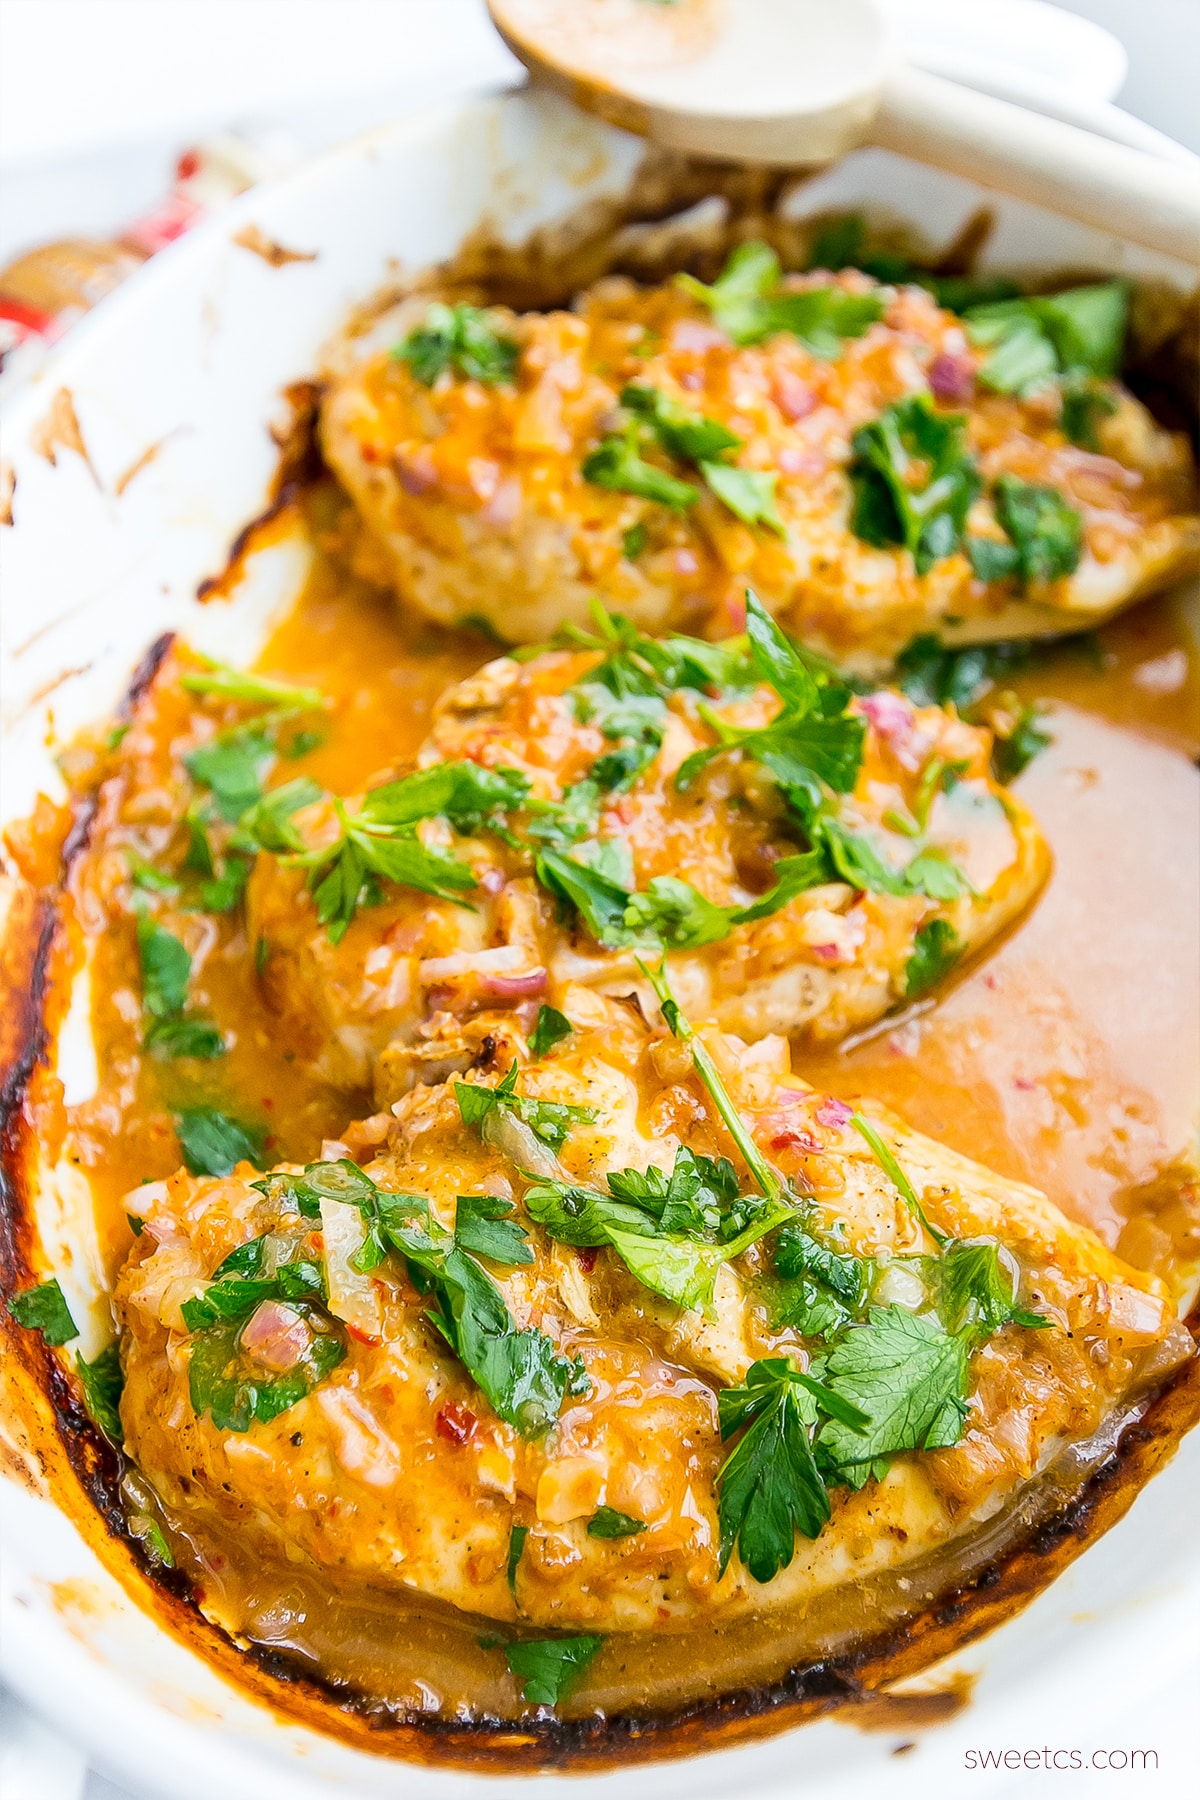 This peri peri chicken is so delicious and easy to make with just a few ingredients!